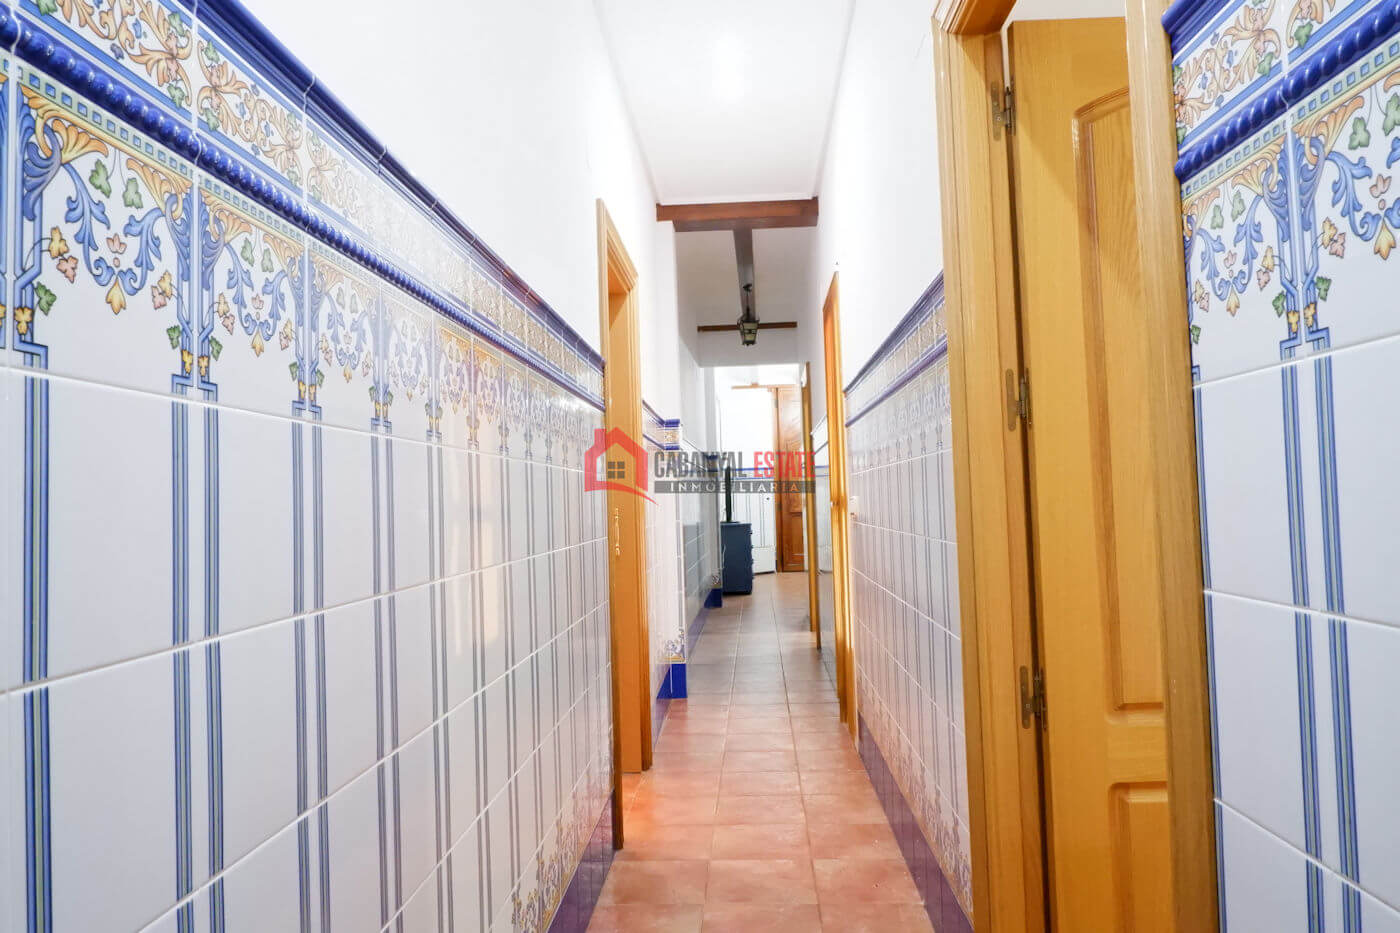 For sale spacious house with garage in El Cabanyal